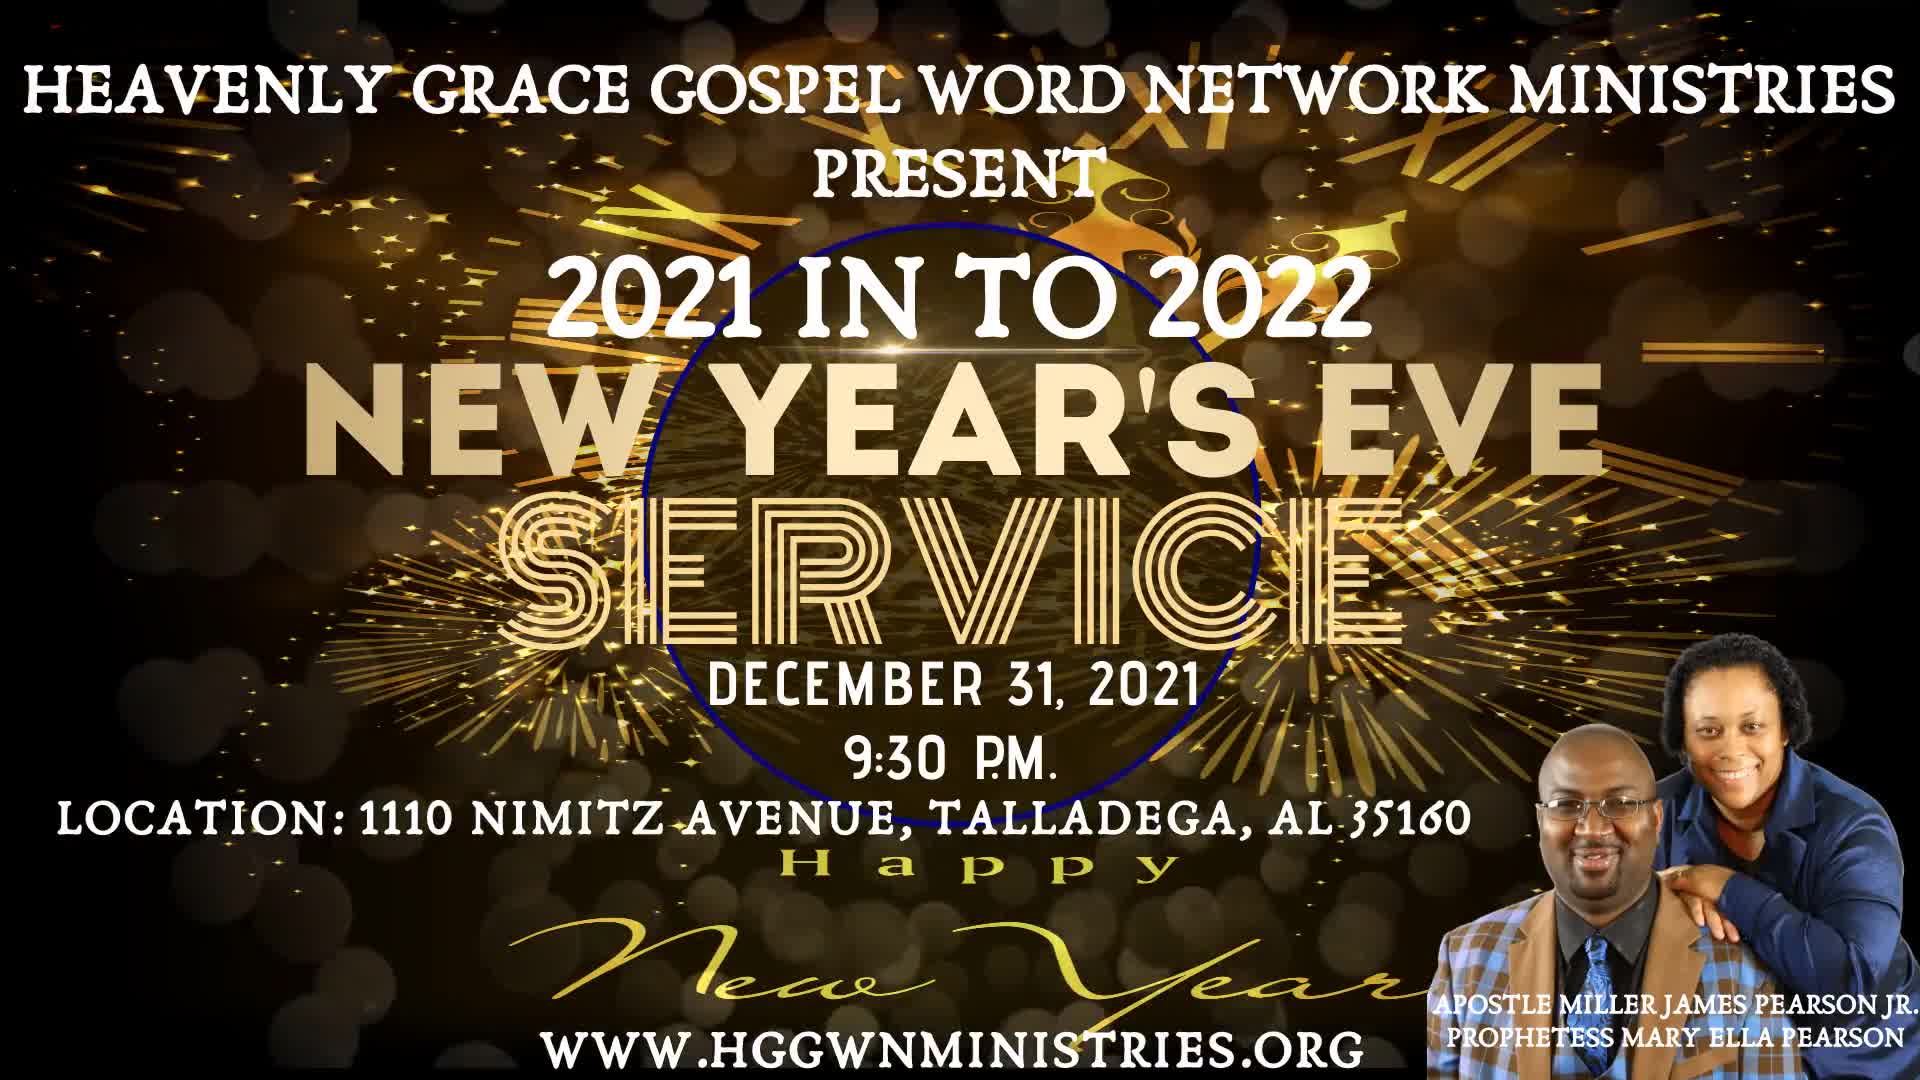 HGGWN Ministries New Years Eve Service